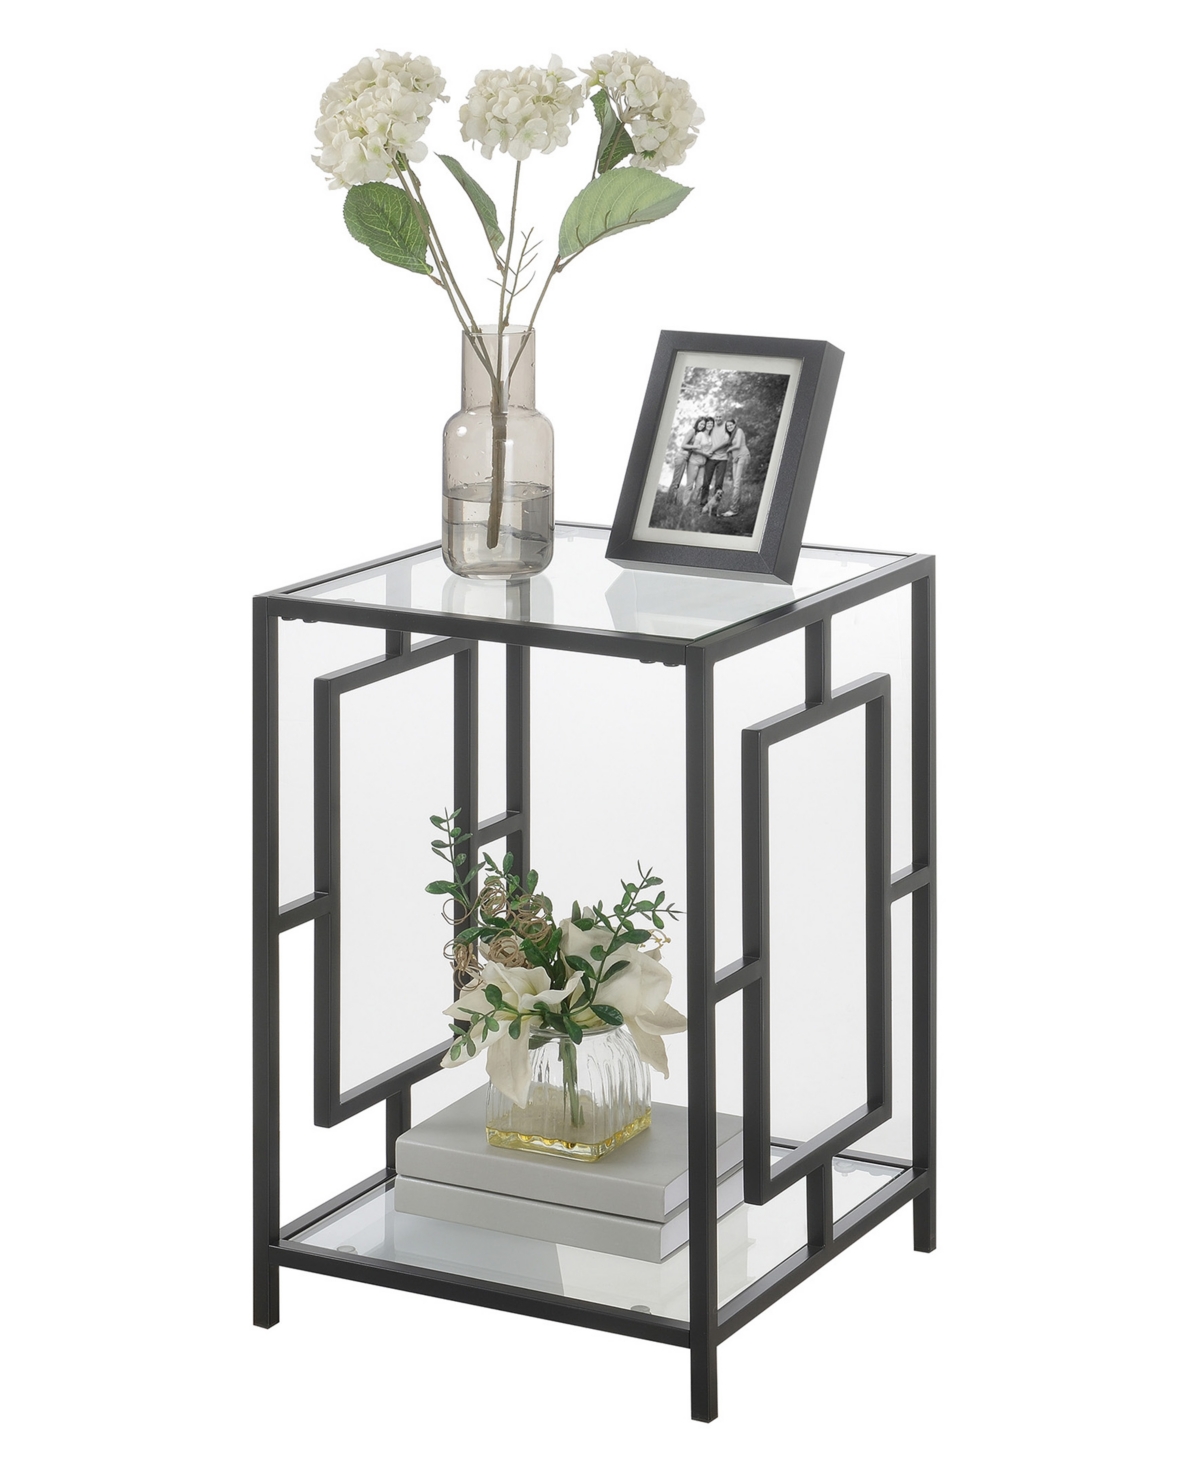 Shop Convenience Concepts 15.75" Town Square Metal End Table With Shelf In Black